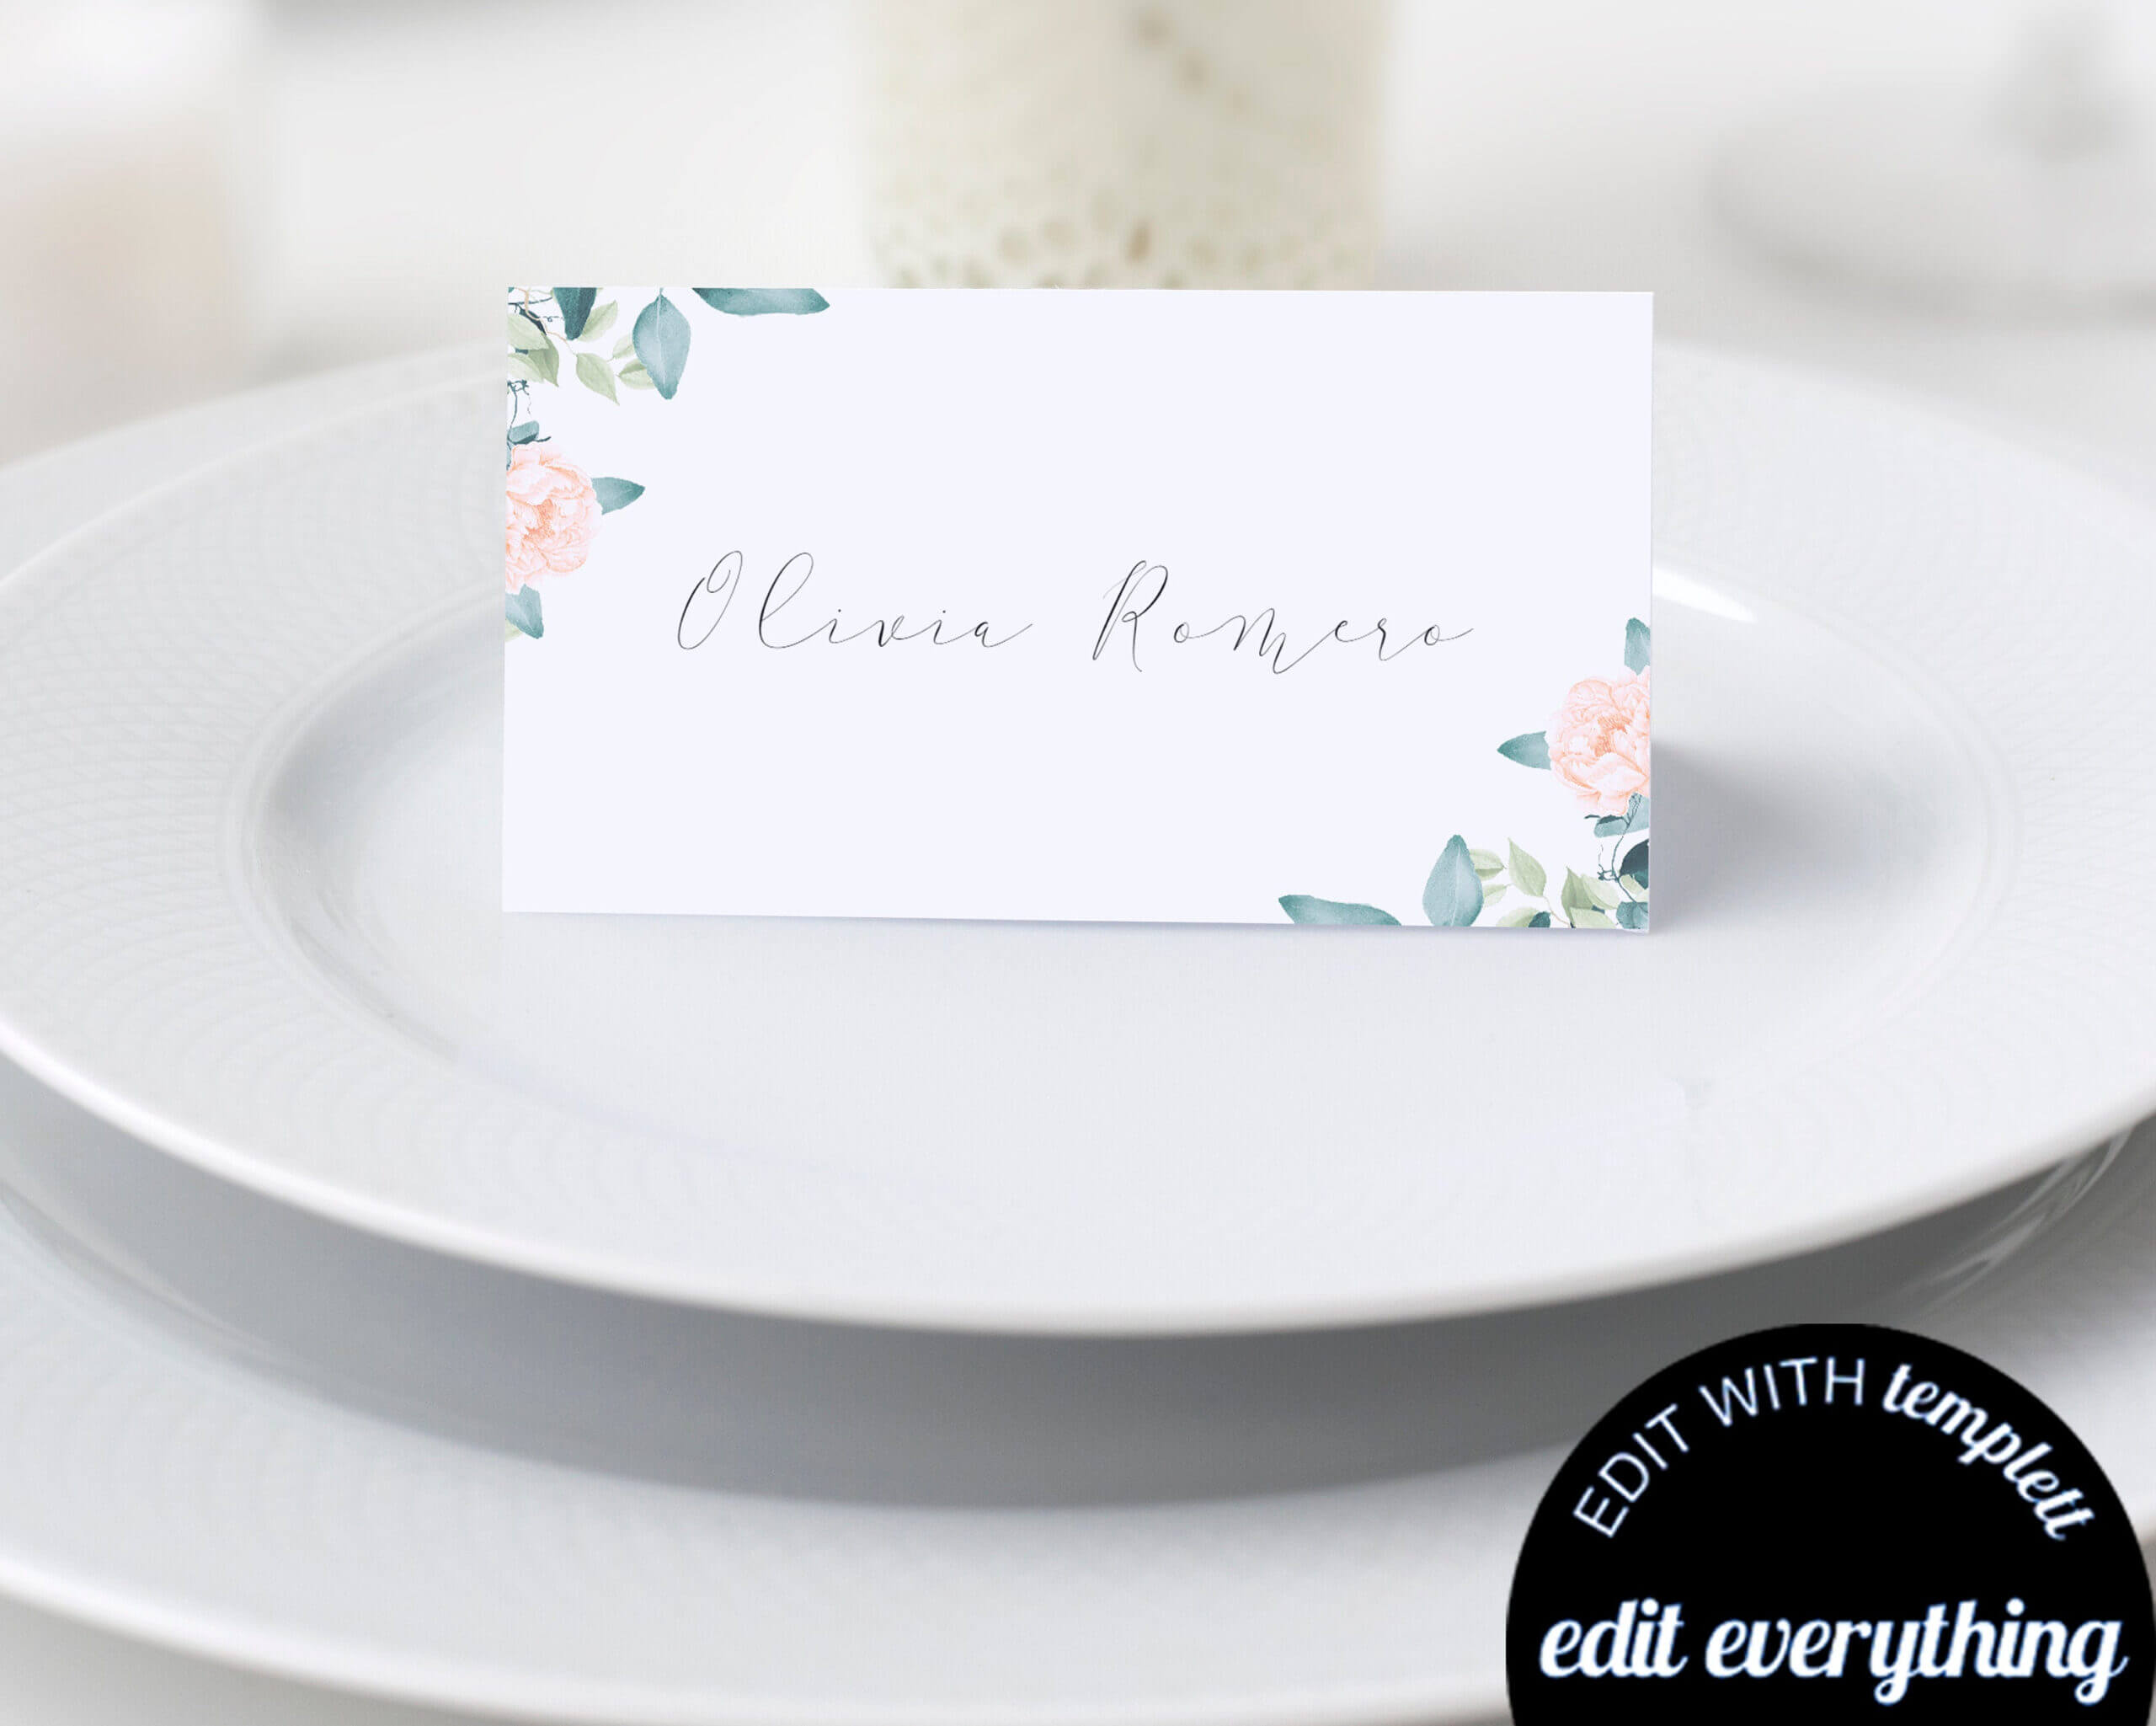 019 Template For Place Cards Il Fullxfull 1542140750 Dg3V Regarding Free Template For Place Cards 6 Per Sheet